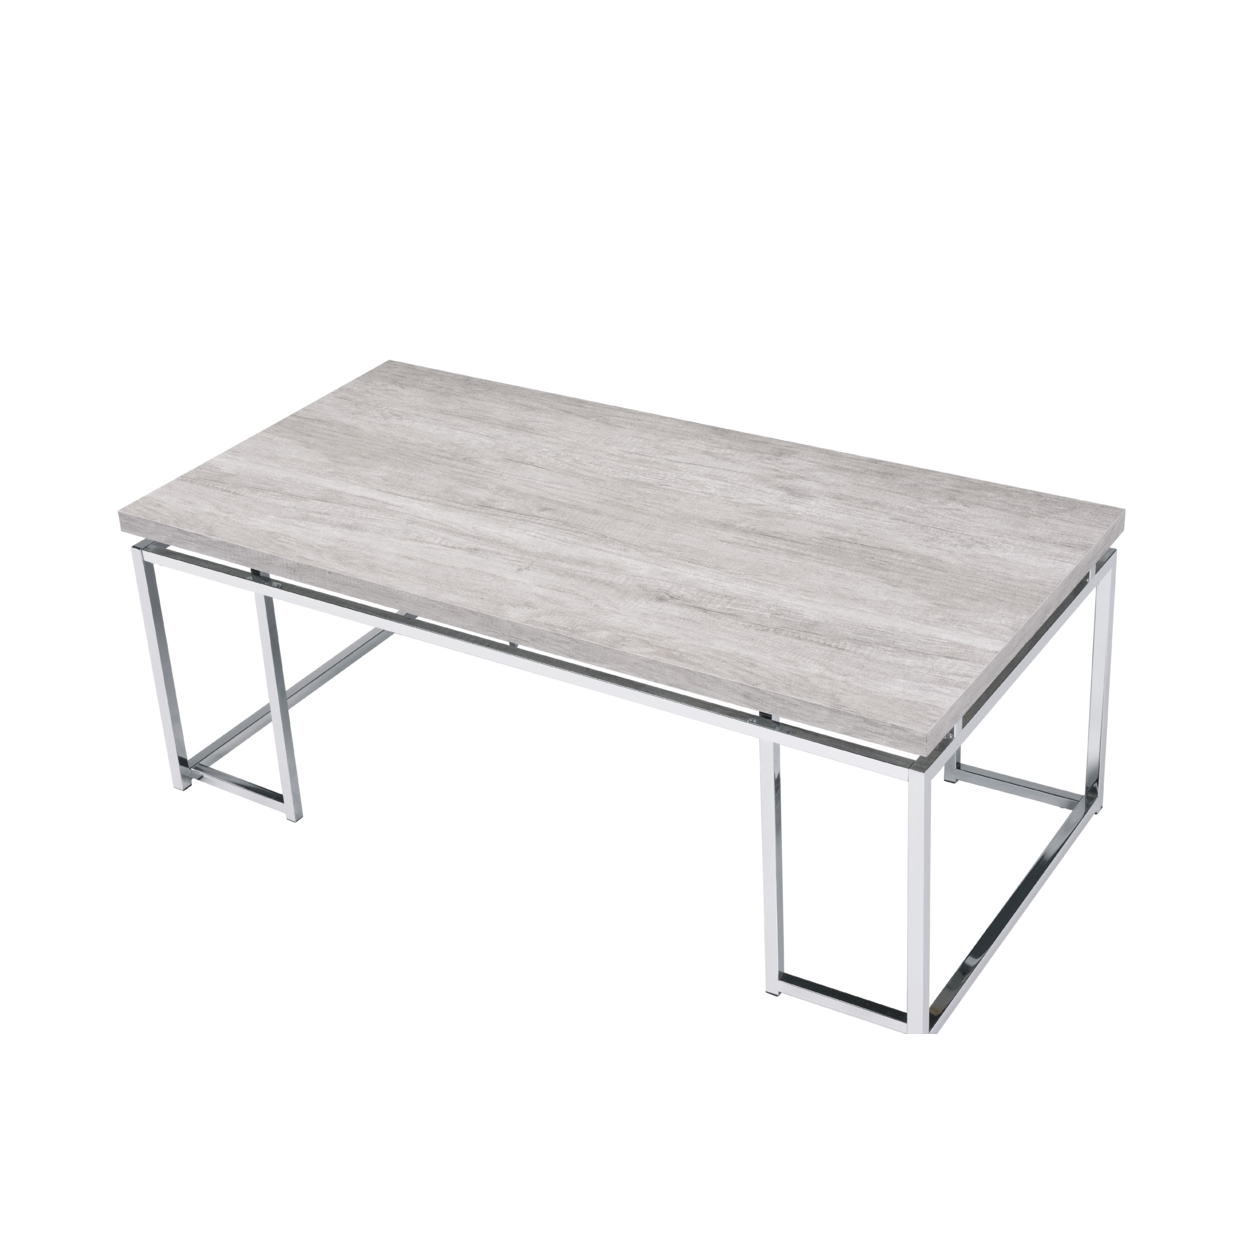 Coffee Table With Rectangular Tabletop And Metal Legs, Silver And Brown- Saltoro Sherpi